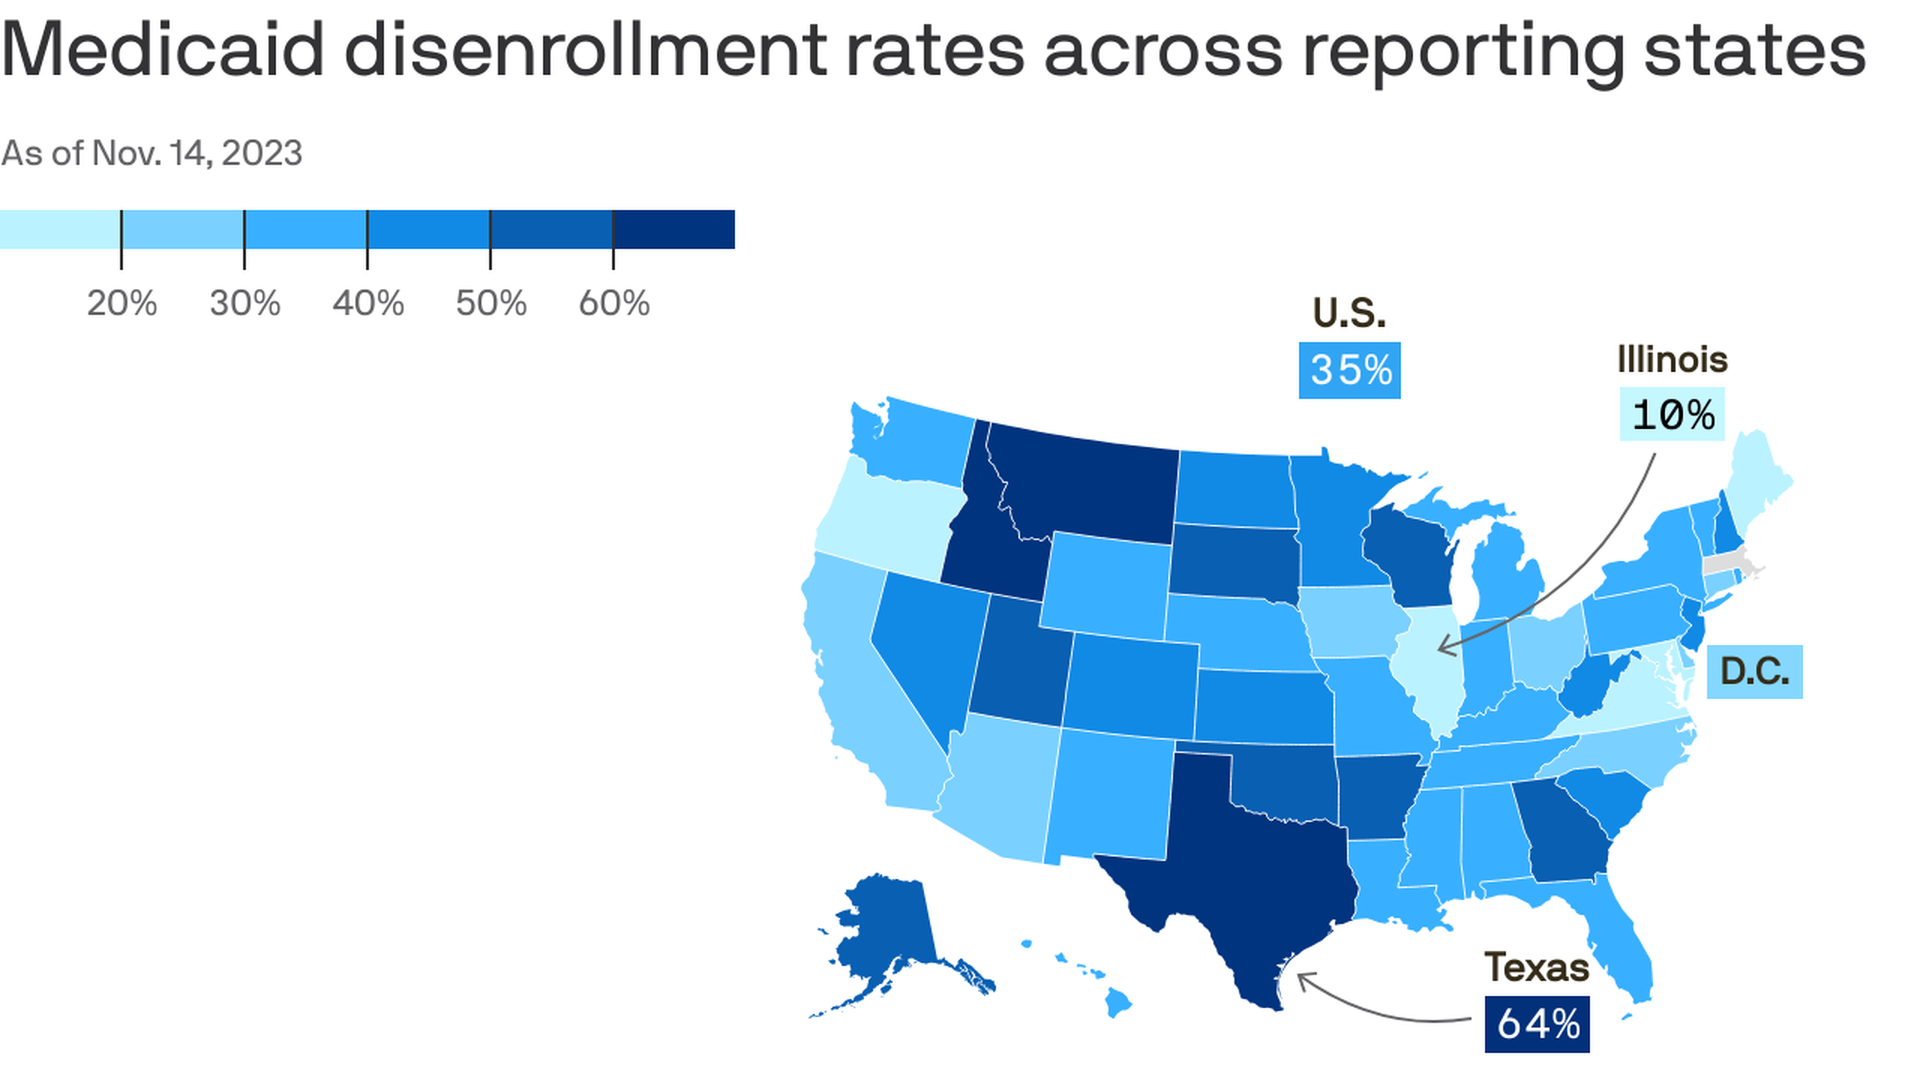 Choropleth map showing Medicaid disenrollment rates in the U.S. as of Nov. 14, 2023. Over 35% of Medicaid enrollees have been disenrolled. Texas had the highest rate at 64%, while Illinois had the lowest at 10%.